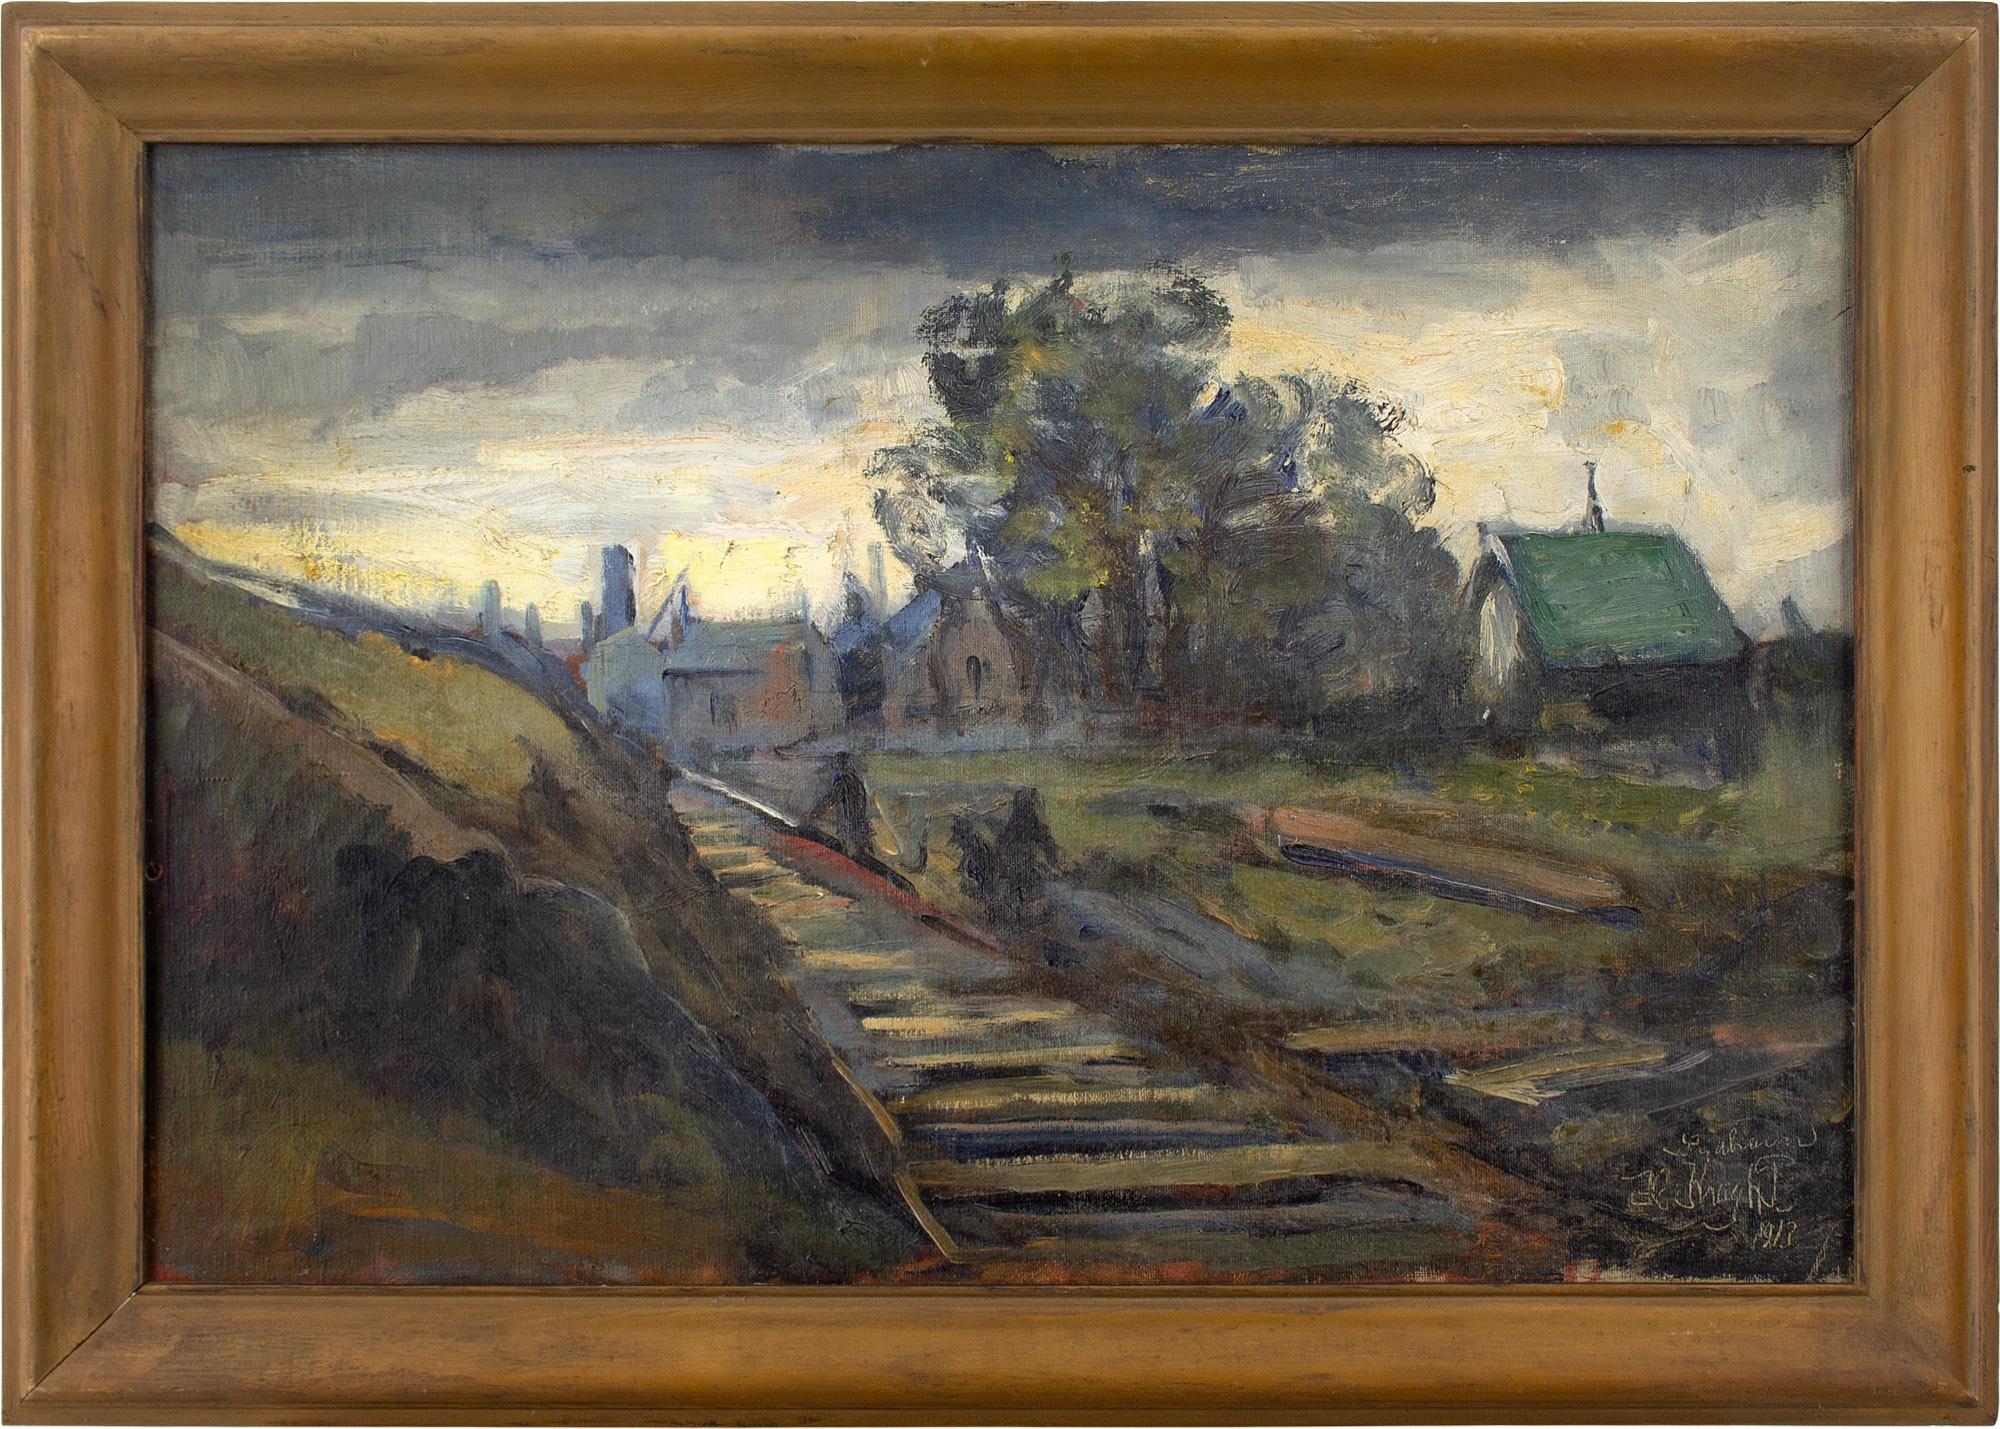 This early 20th-century oil painting by Danish artist Hjalmar Kragh-Pedersen (1883-1962) depicts the industrial area of Sydhavn, Denmark.

Hjalmar Kragh-Pedersen was predominantly known for his expressive oil paintings depicting industrial scenes,